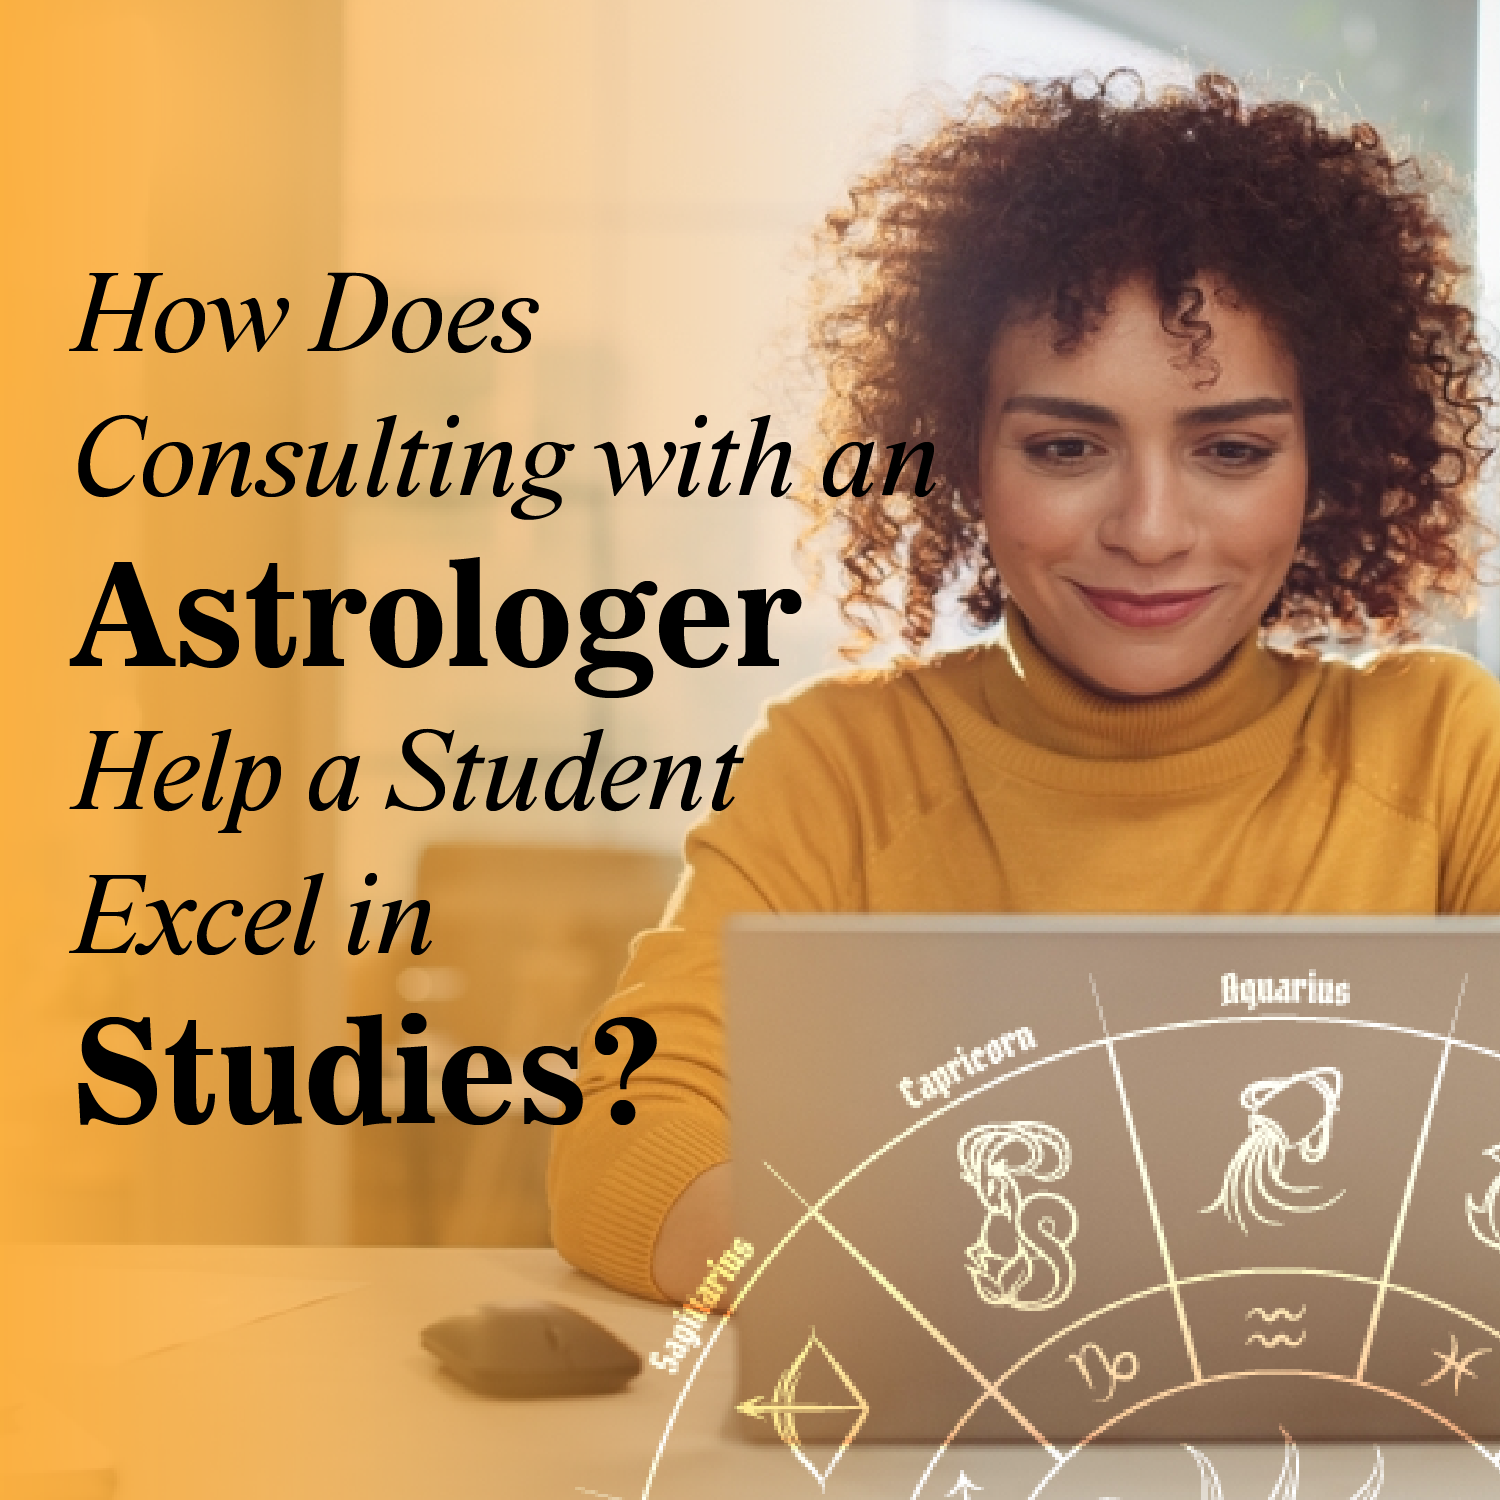 How Does Consulting with an Astrologer Help a Student Excel in Studies? | TechPlanet